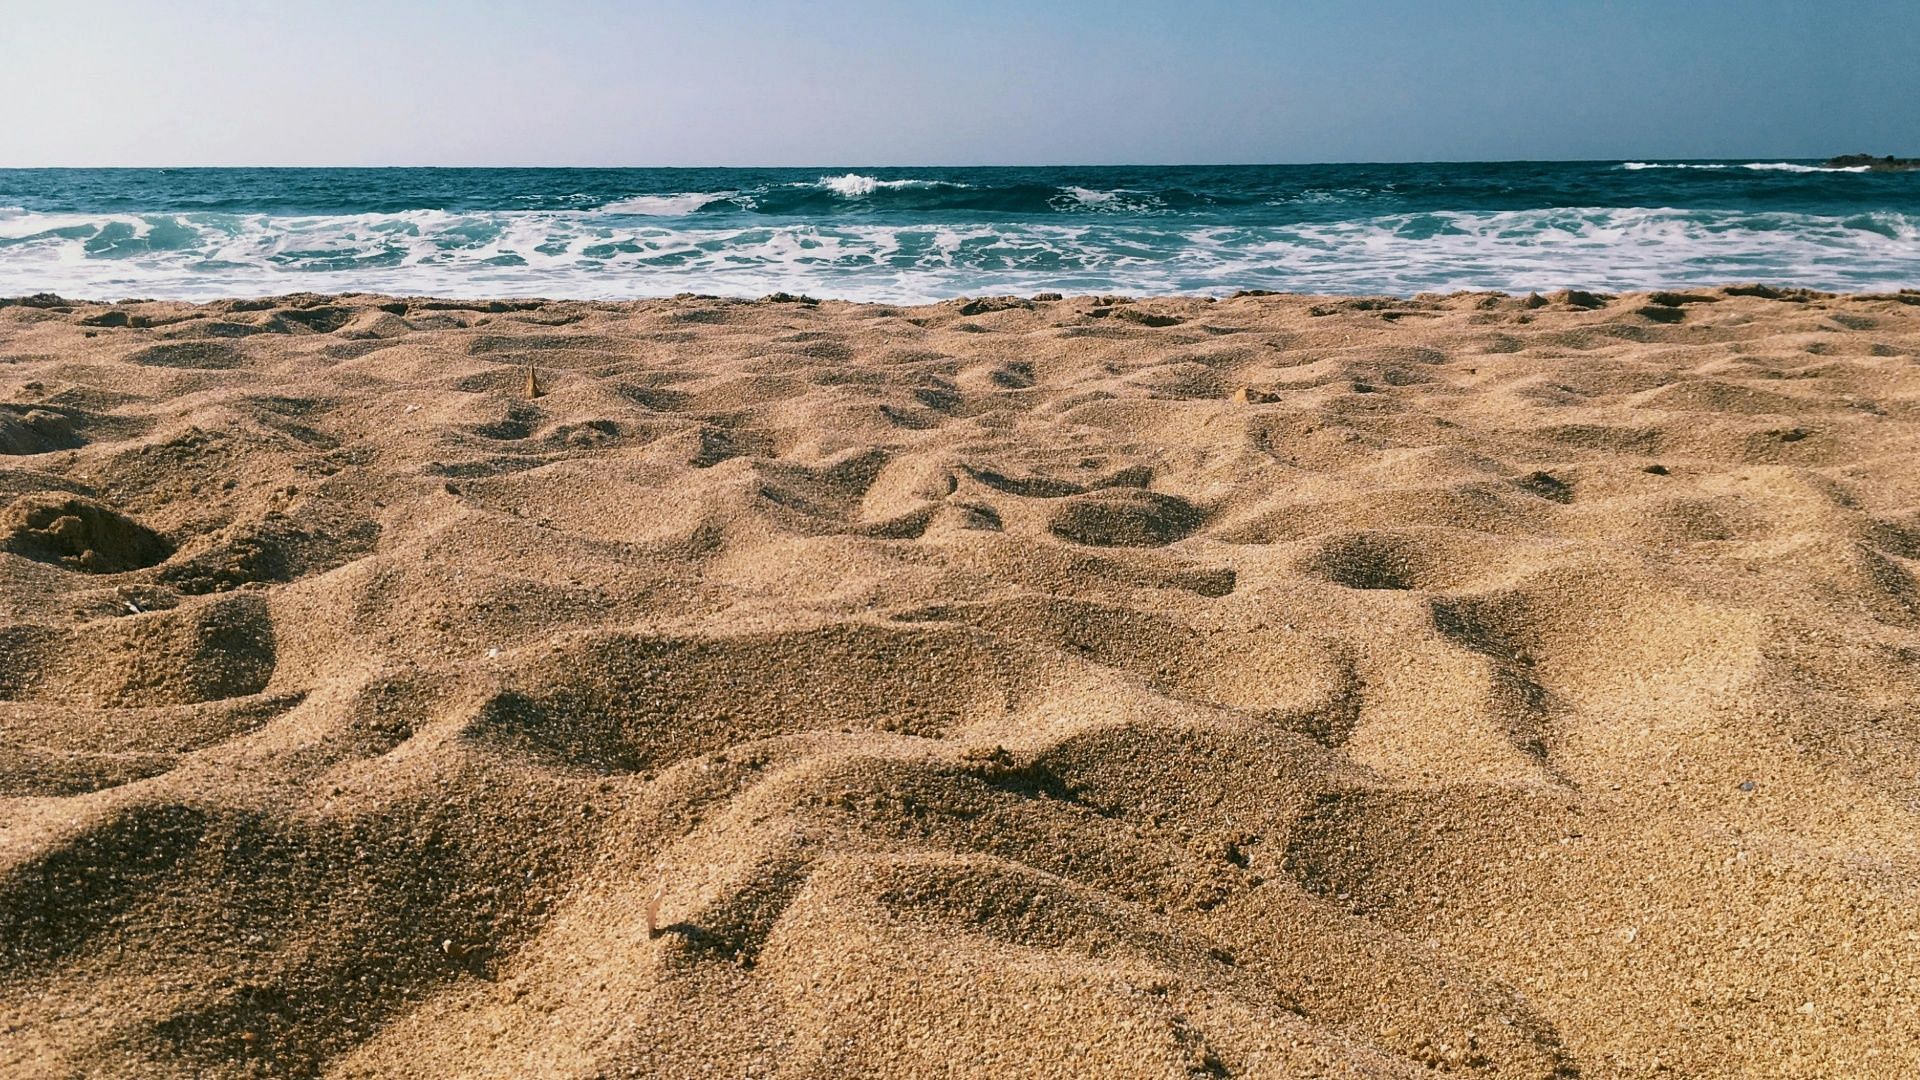 Sand hole collapse leads to the death of one young girl in Fort Lauderdale (Photo by Elena Ktenopoulou on Unsplash)